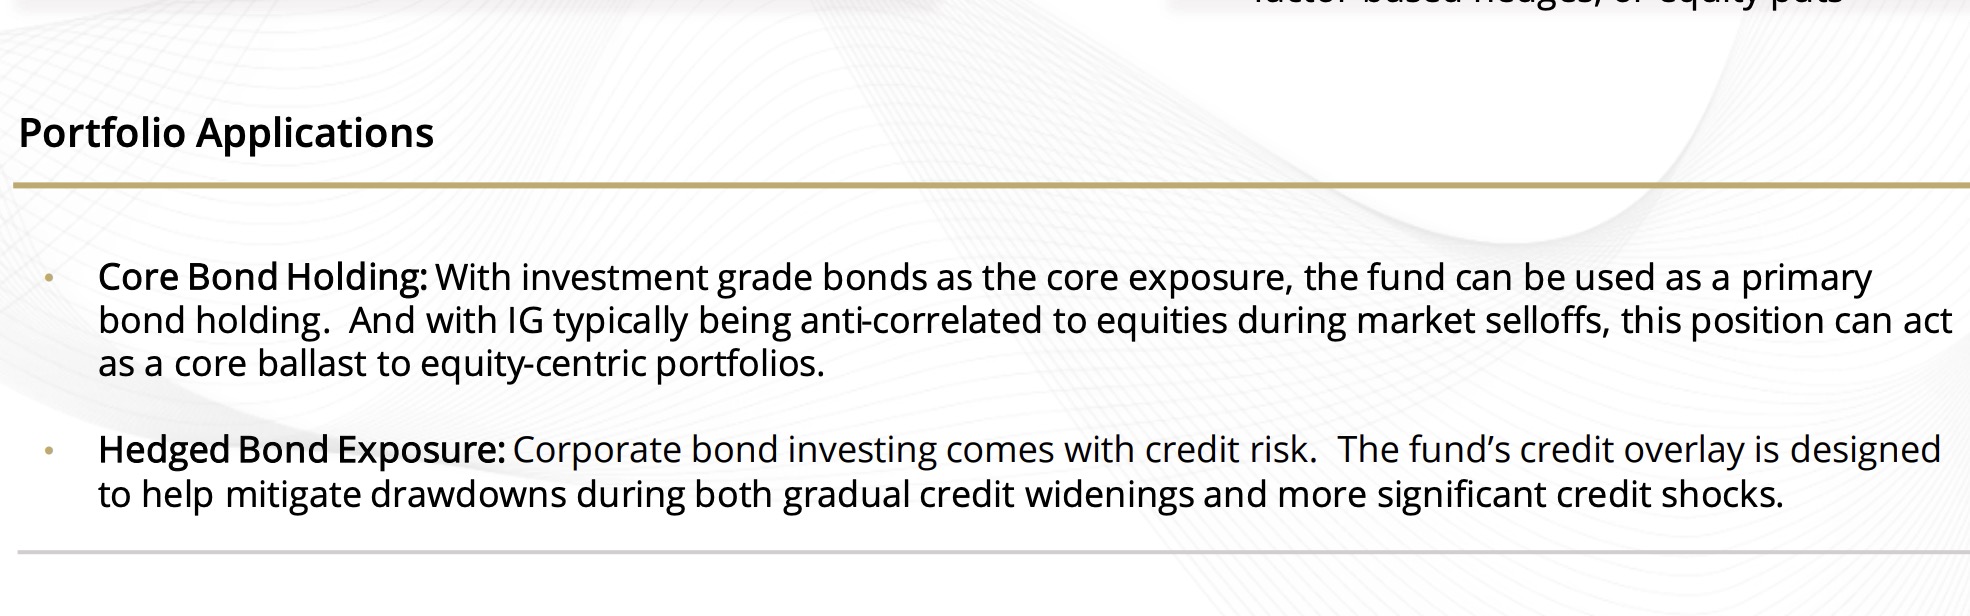 AGGH ETF Simplify Aggregate Bond Fund Portfolio Applications including as a core bond holding with hedged bond exposure 